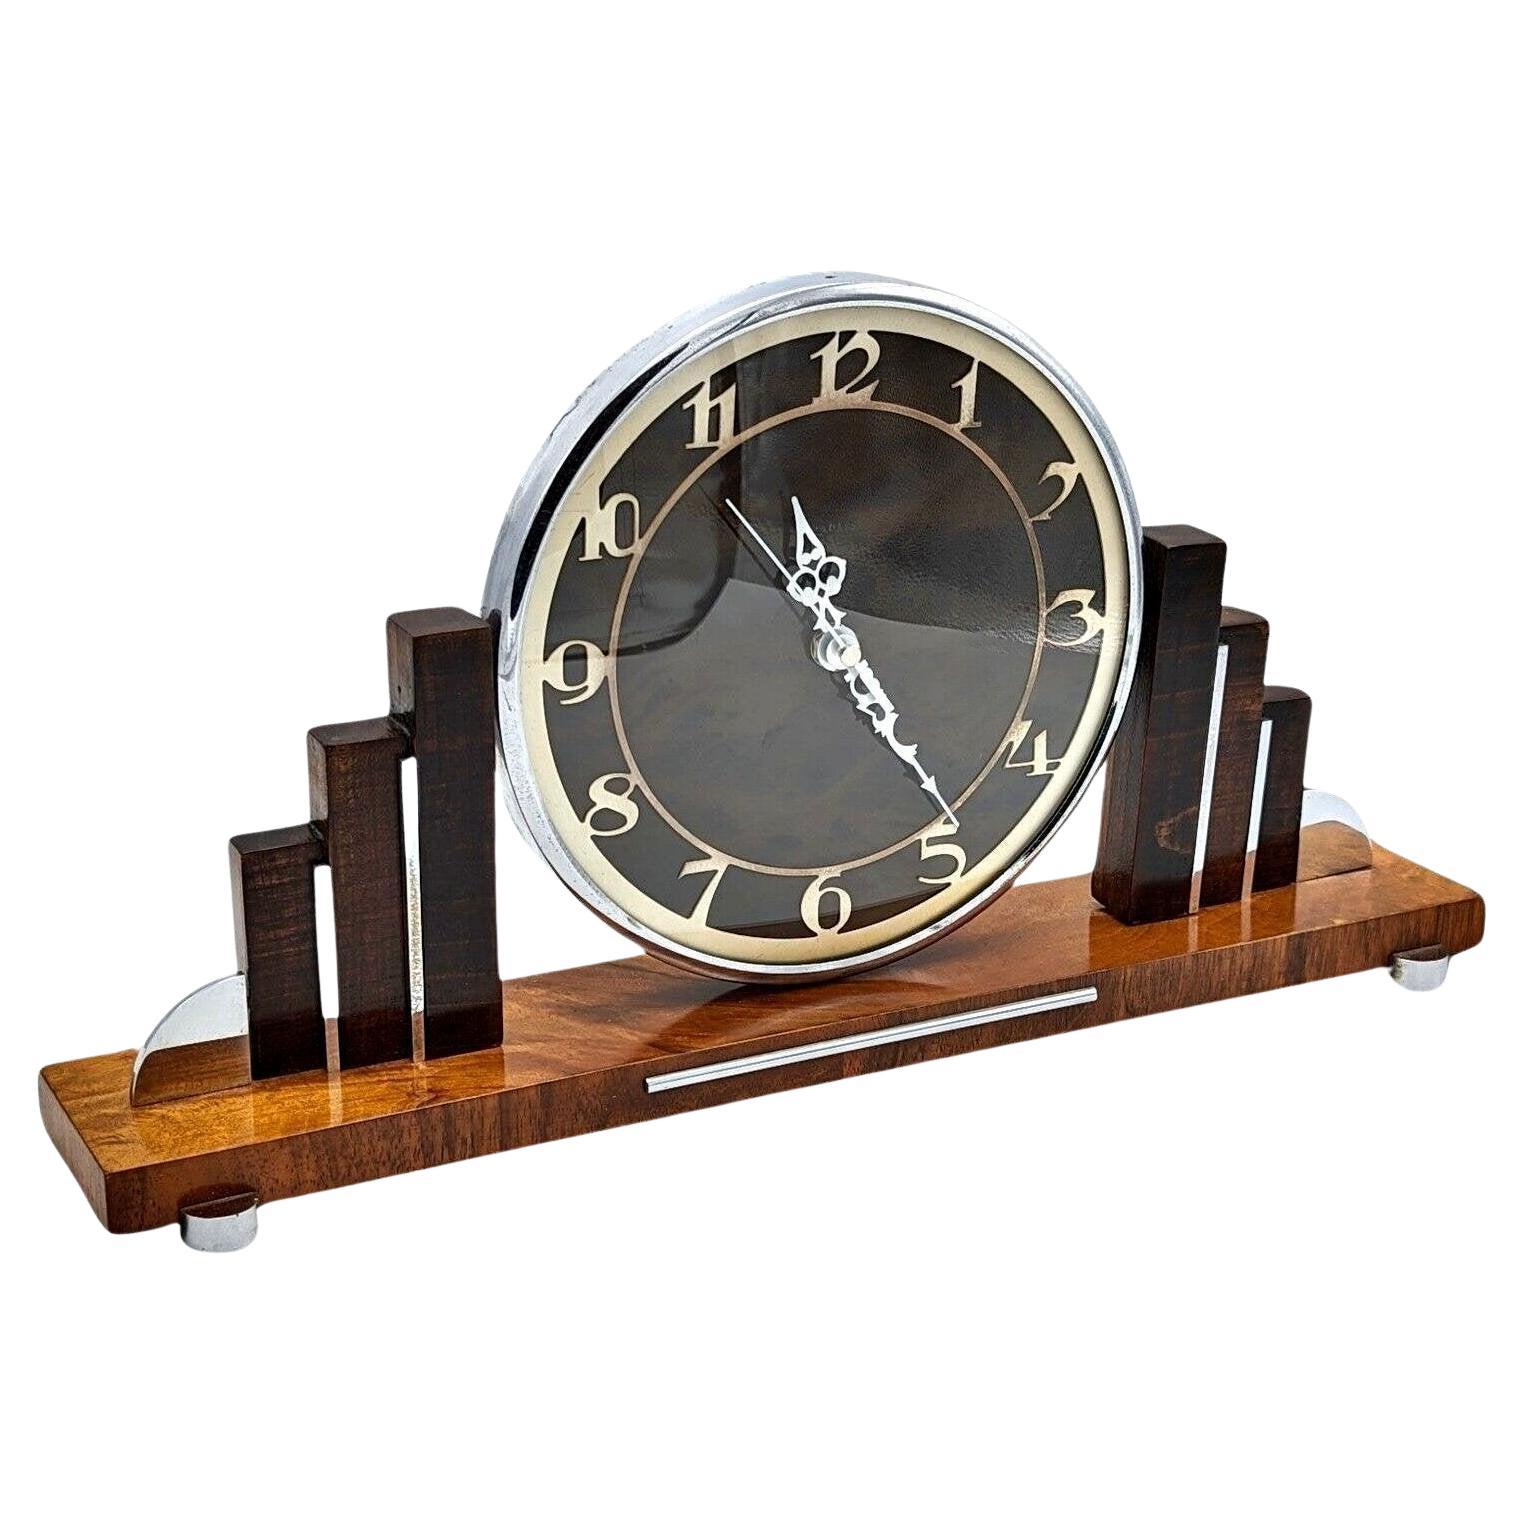 For your consideration is this very stylish 1930s Art Deco mantle clock made in England. Superb skyscraper stepped sides . Made from Walnut with chrome accents really sets this clock off perfectly. The movement which was originally electric which